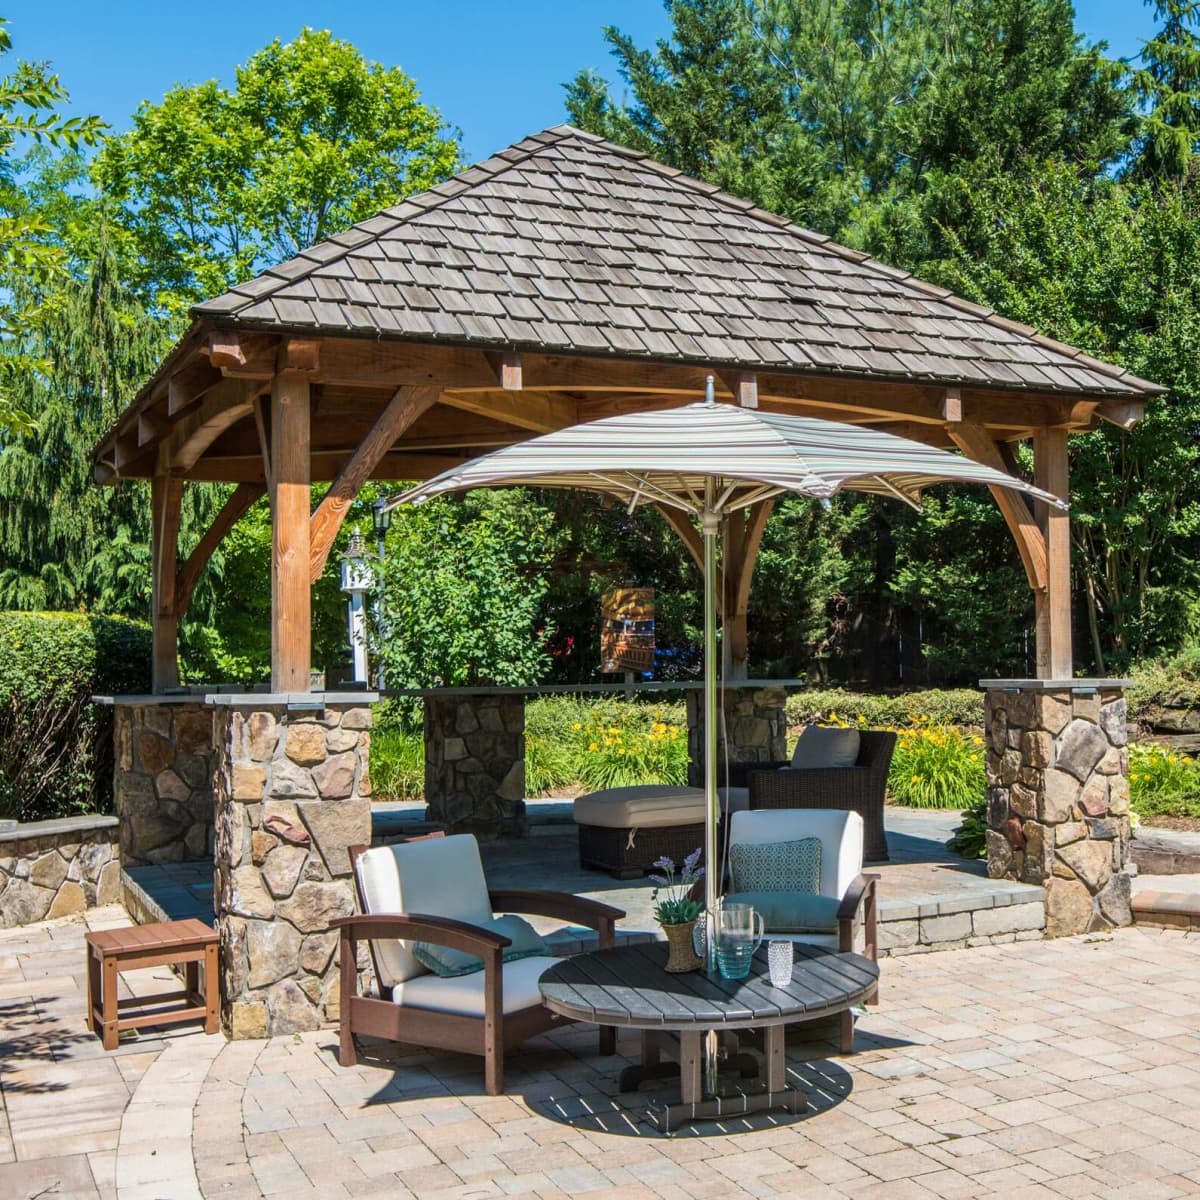 6 Stylish Shade Ideas For Your Patio - Dengarden